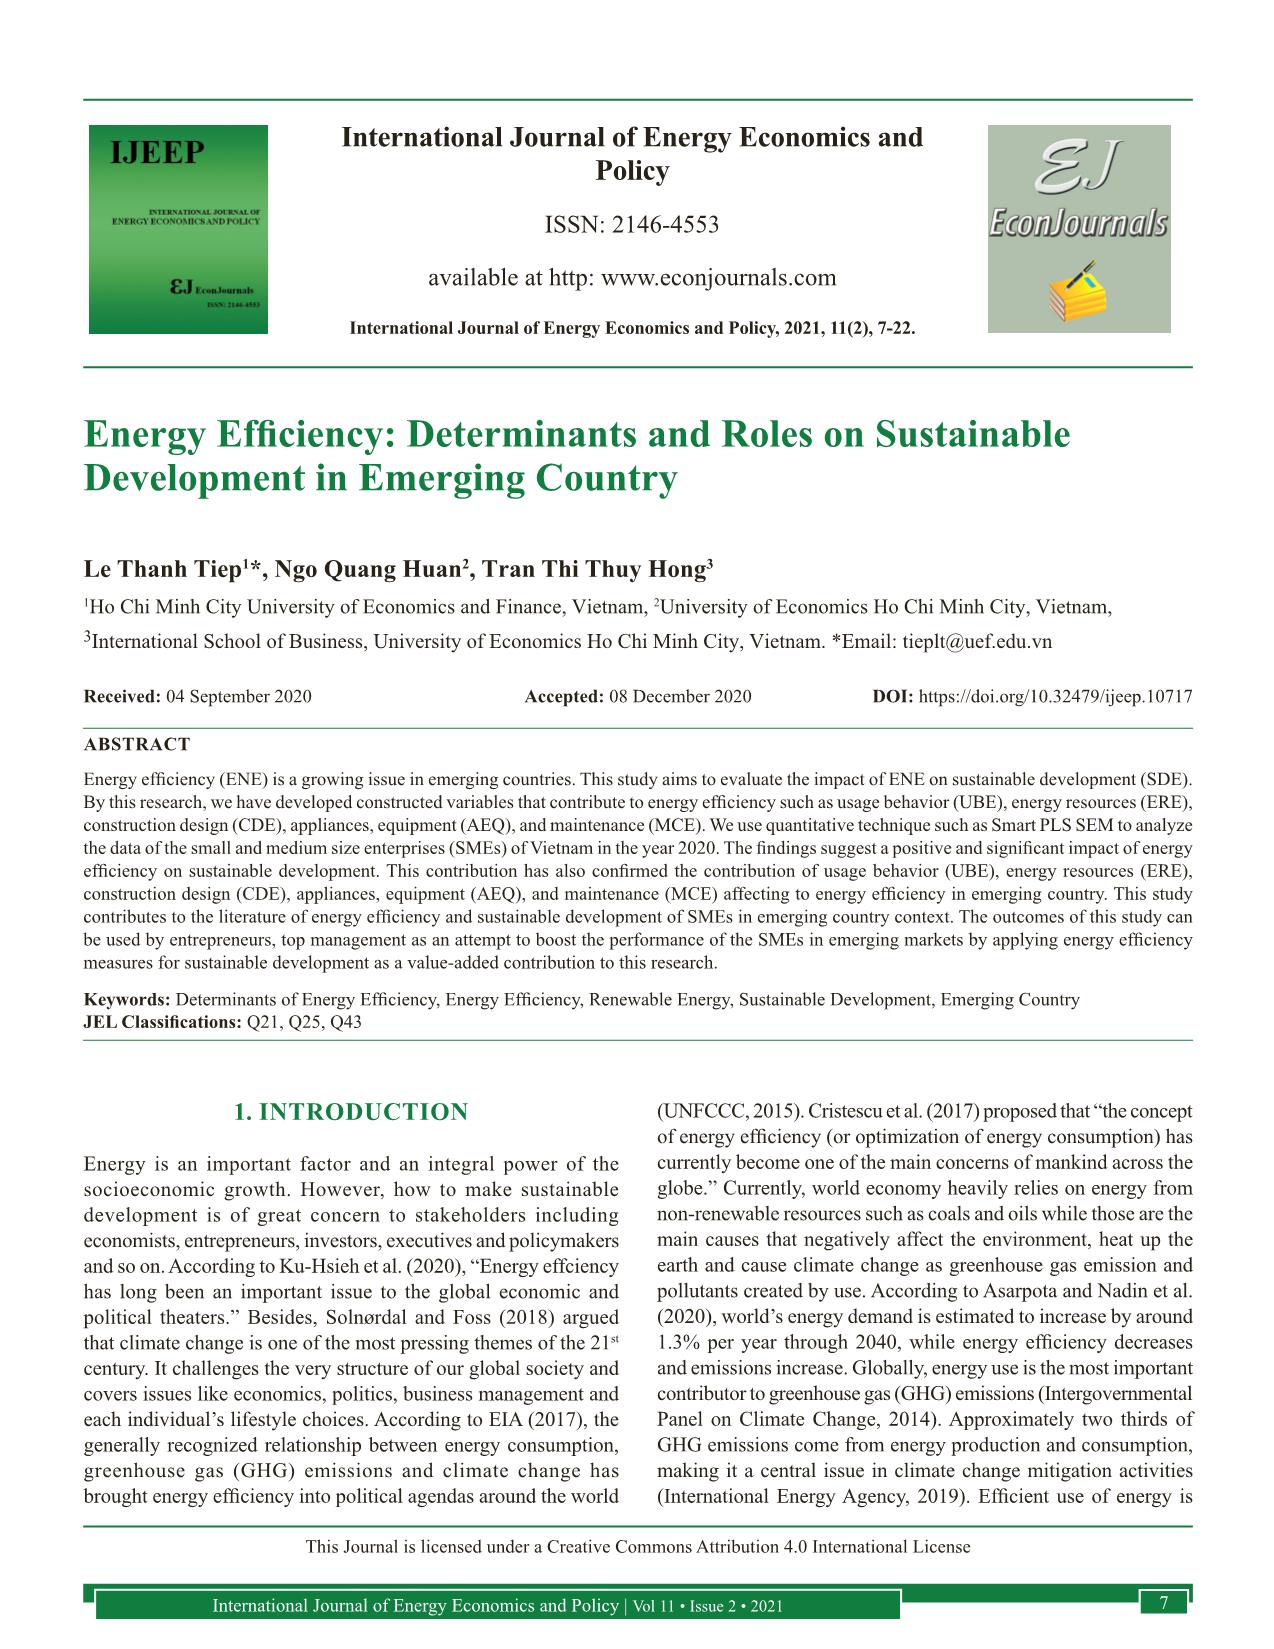 Energy efficiency: Determinants and roles on sustainable development in emerging country trang 1